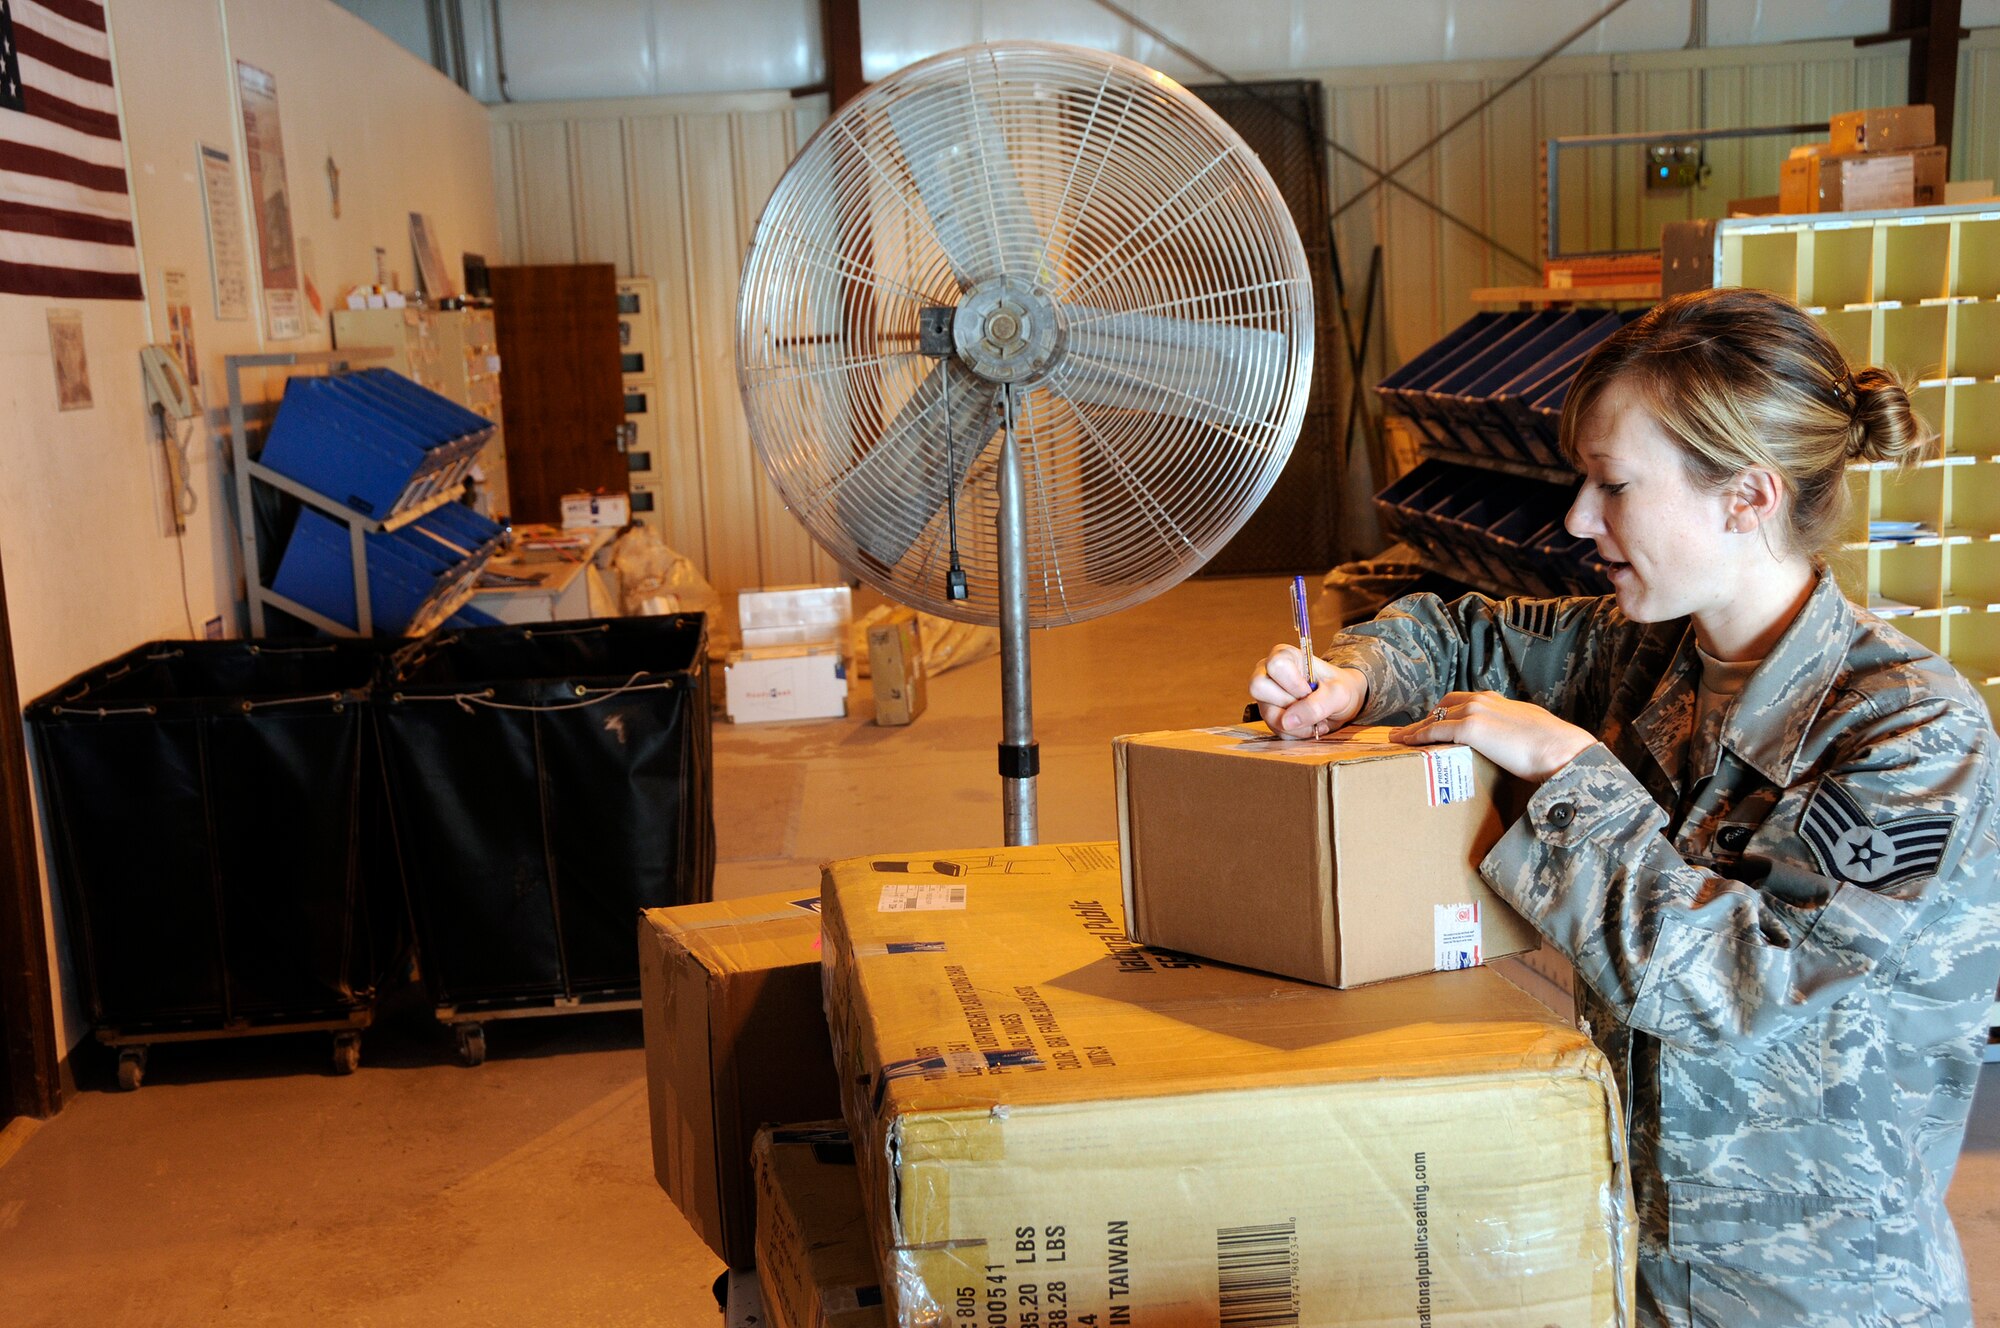 Staff Sergeant Bethany McClain, 379th Expeditionary Contracting Squadron, signs for accountable mail Sept. 30, 2008, at an undisclosed air base in Southwest Asia.  Unit mail clerks, an additional duty, make a daily run to pick up incoming mail and packages for their squadrons.  Sergeant McClain is a native of Safford, Ariz., and is deployed from Barksdale, La., in support of Operations Iraqi and Enduring Freedom and Joint Task Force-Horn of Africa.  (U.S. Air Force photo by Tech. Sgt. Michael Boquette/Released)